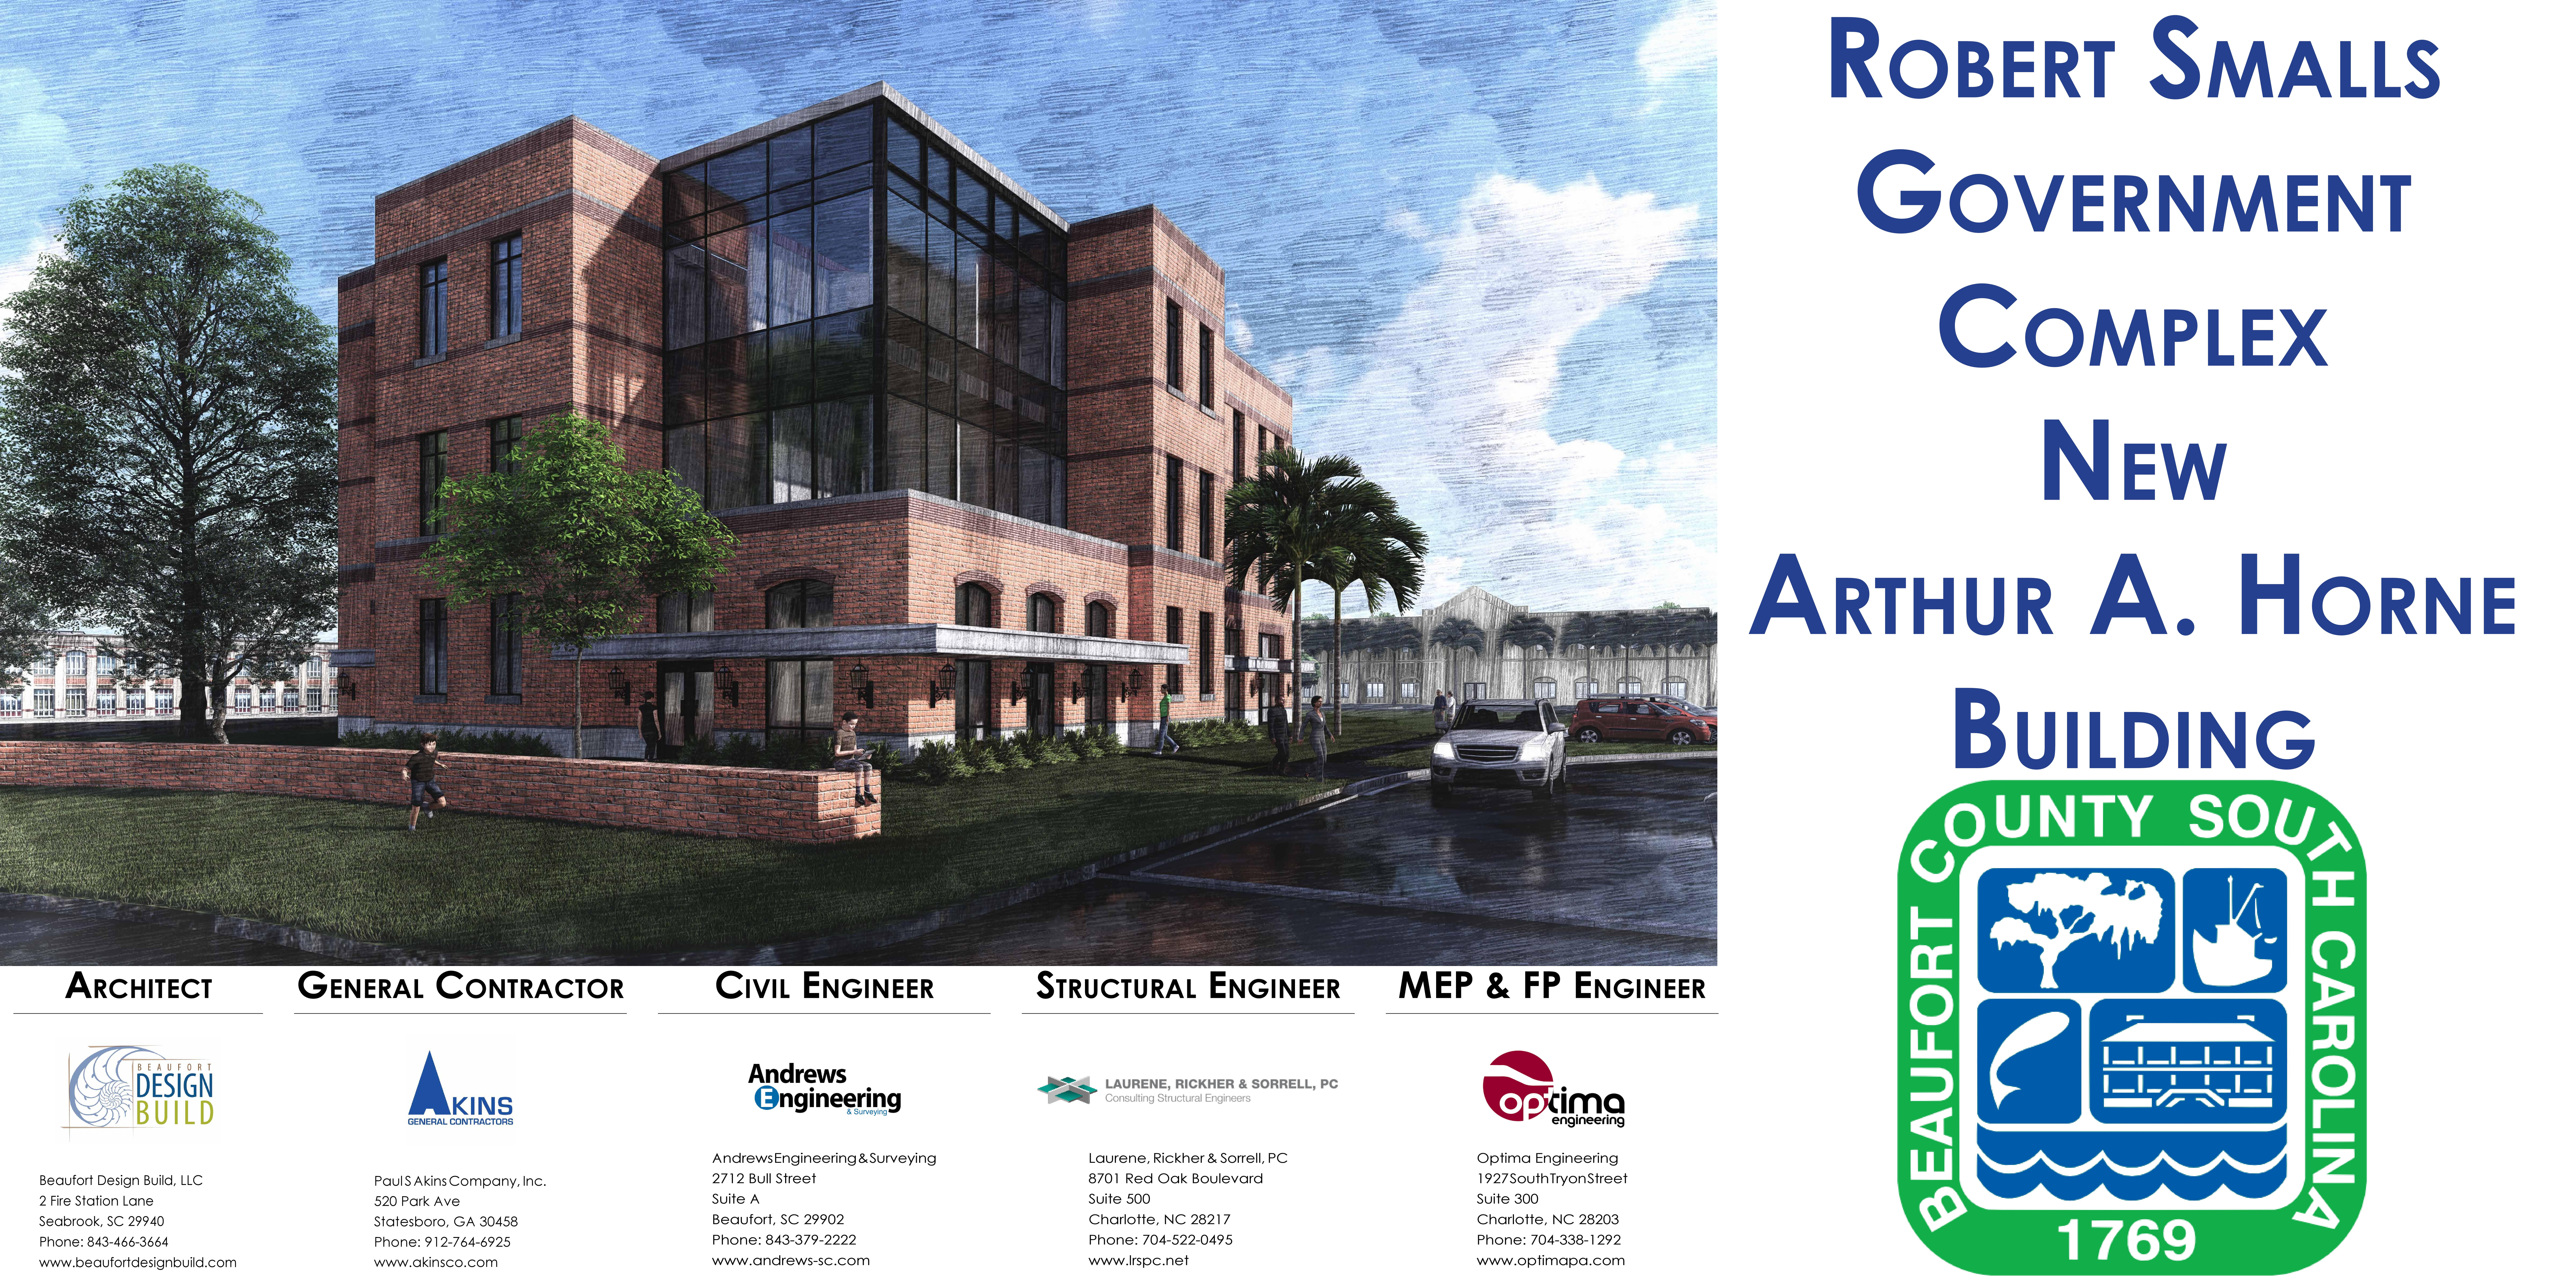 Groundbreaking Ceremony for County’s  New Arthur Horne Building Scheduled for February 18